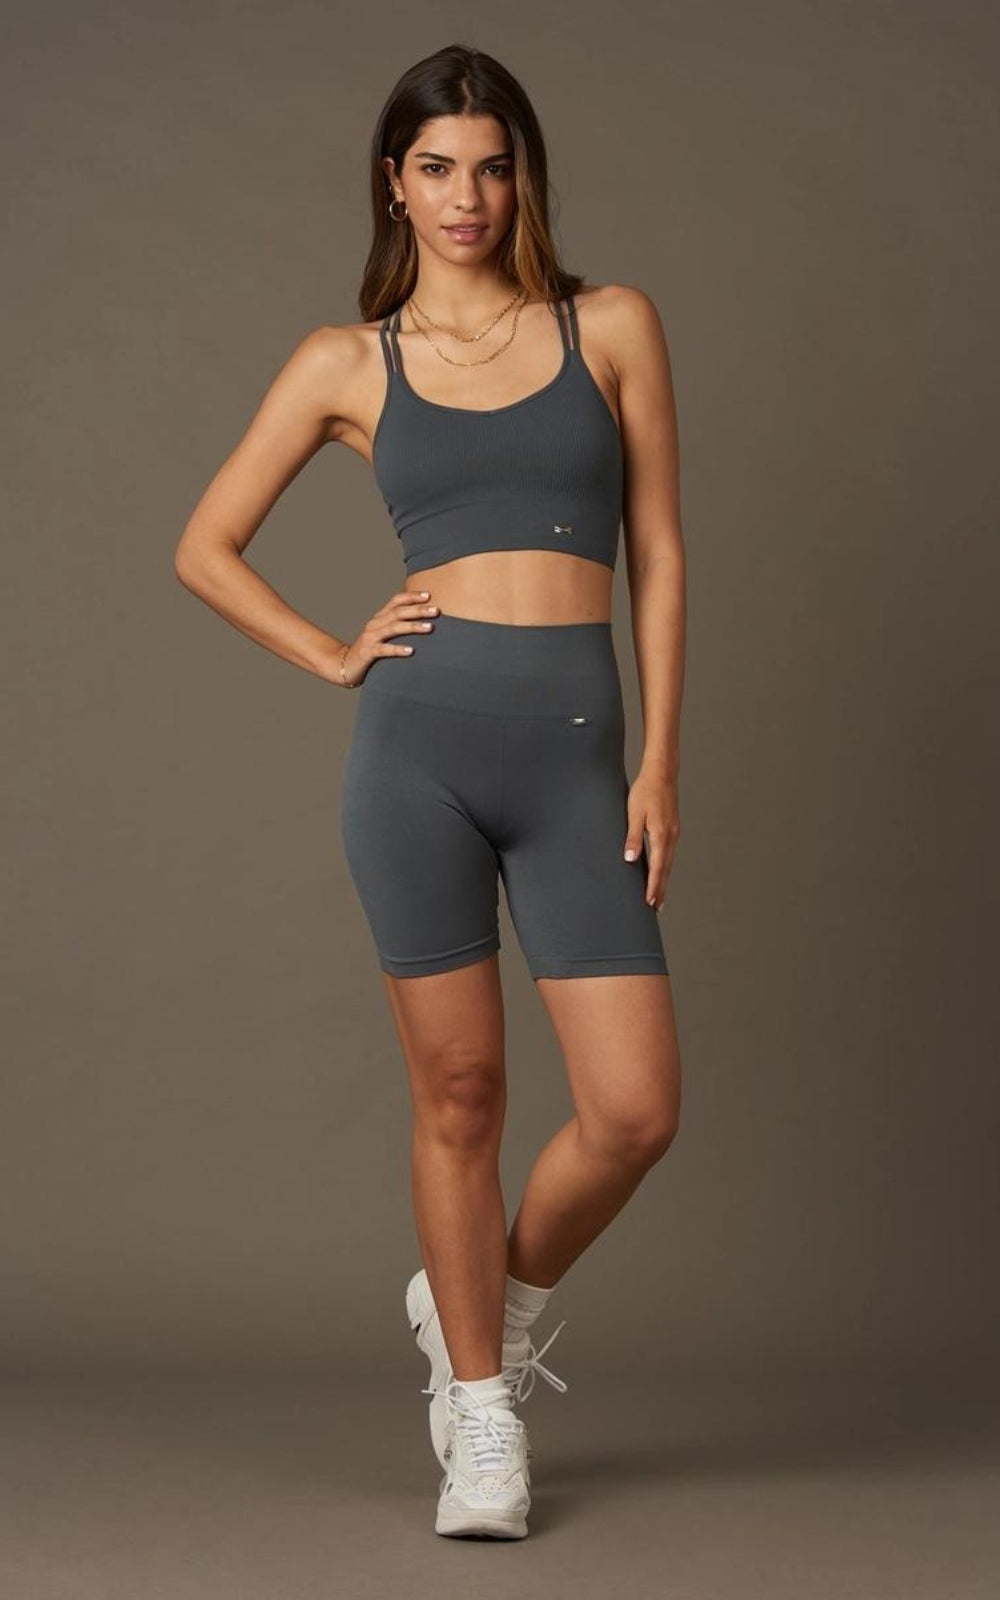 Anthracite Grey High-Waisted Push-Up Shorts by Believe Athletics